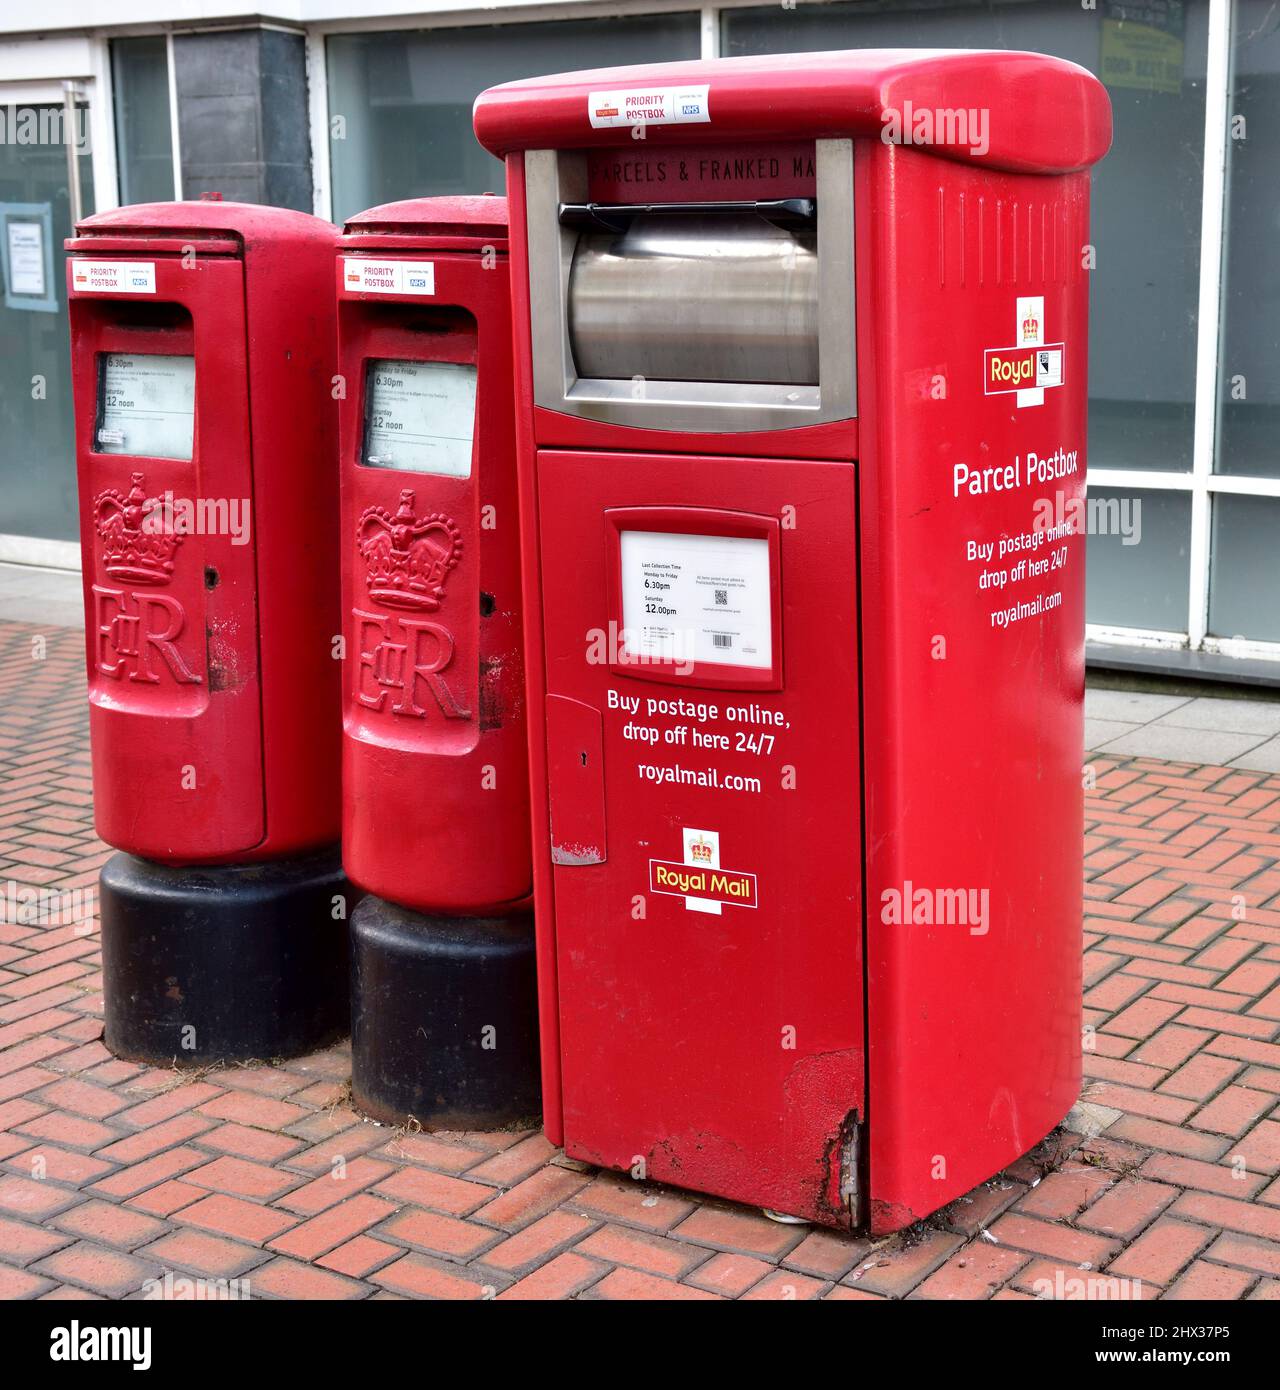 Royal Mail and parcel post boxes, UK Stock Photo